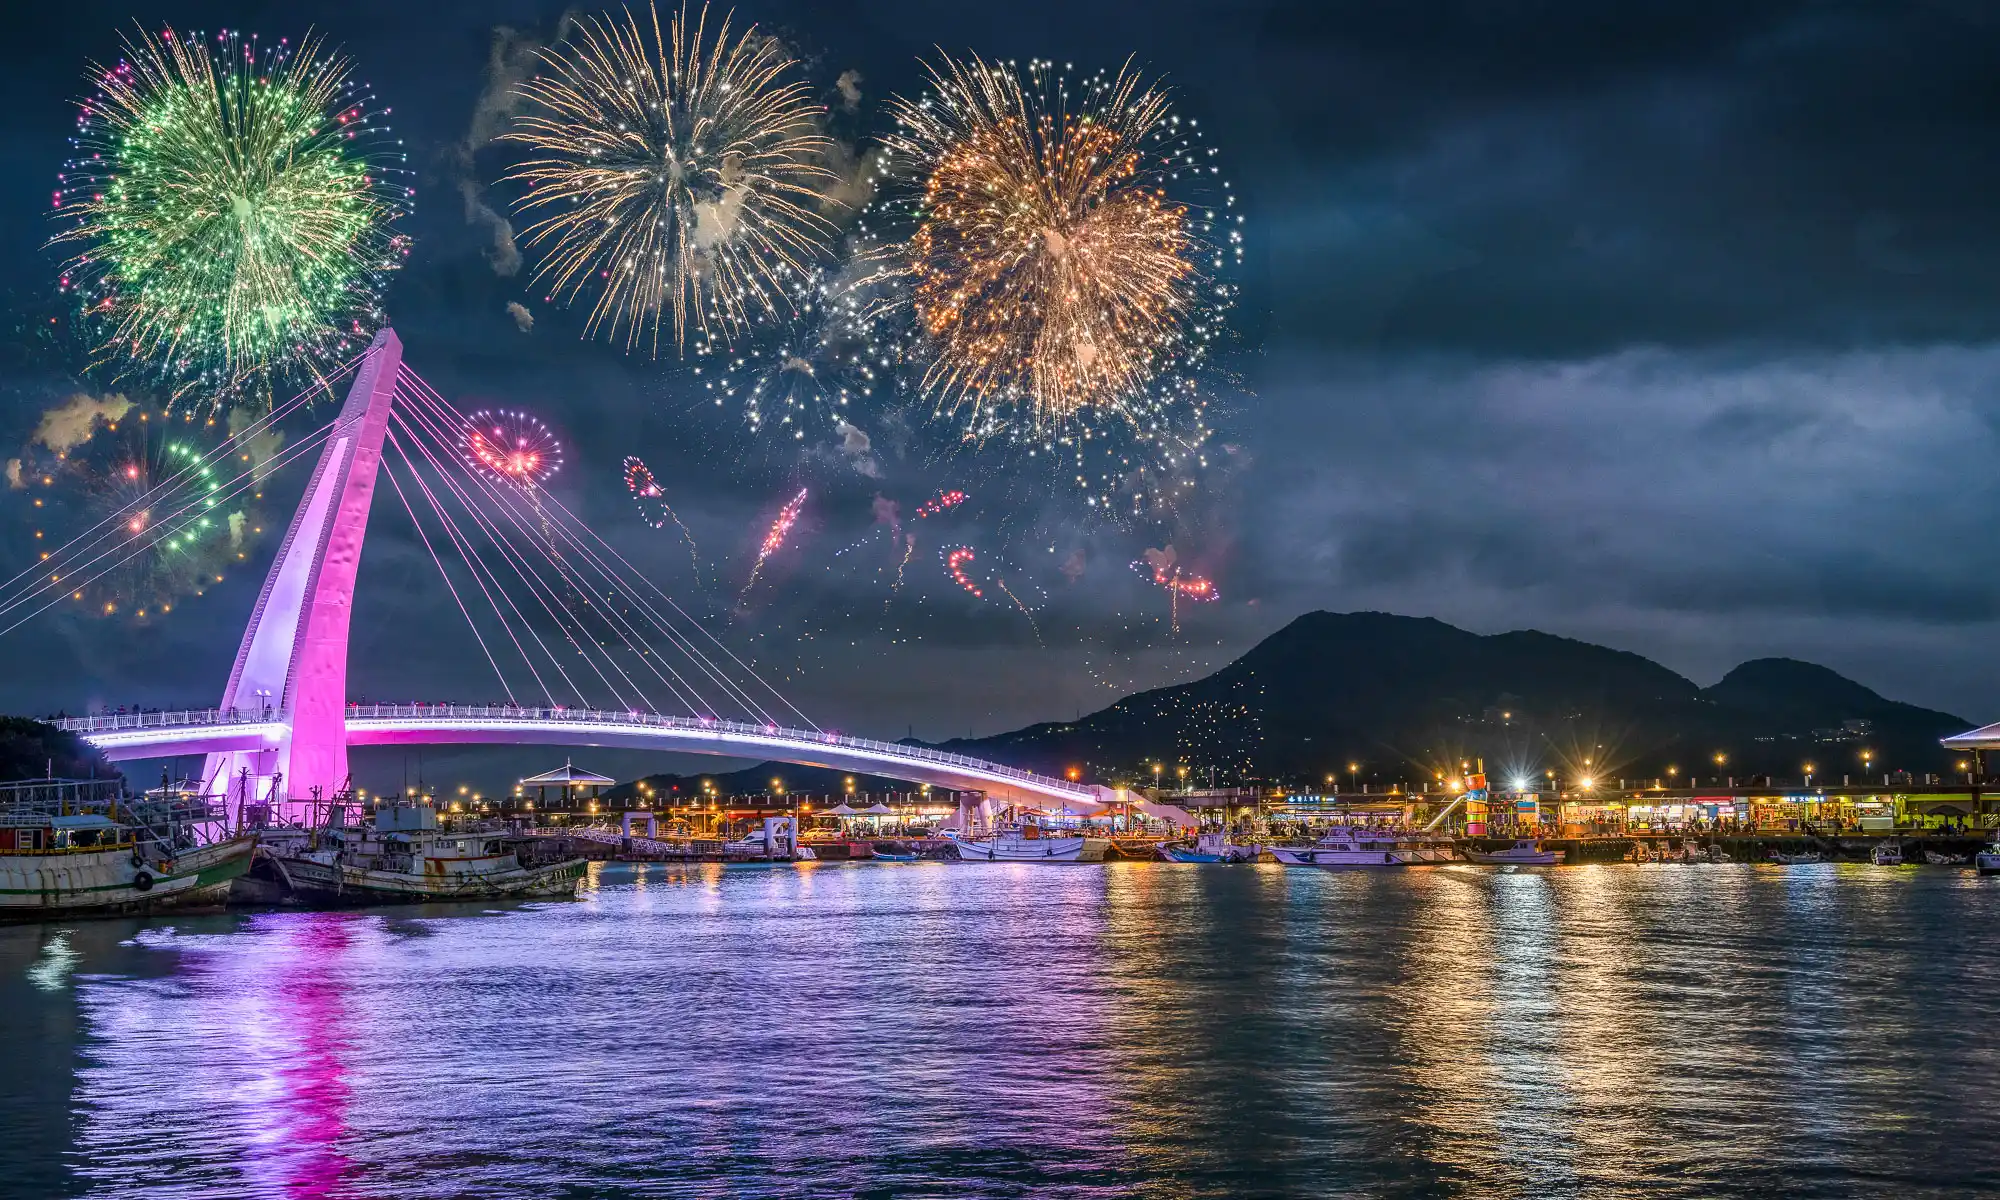 Fireworks explode over Tamsui Lover's Bridge in the evening.